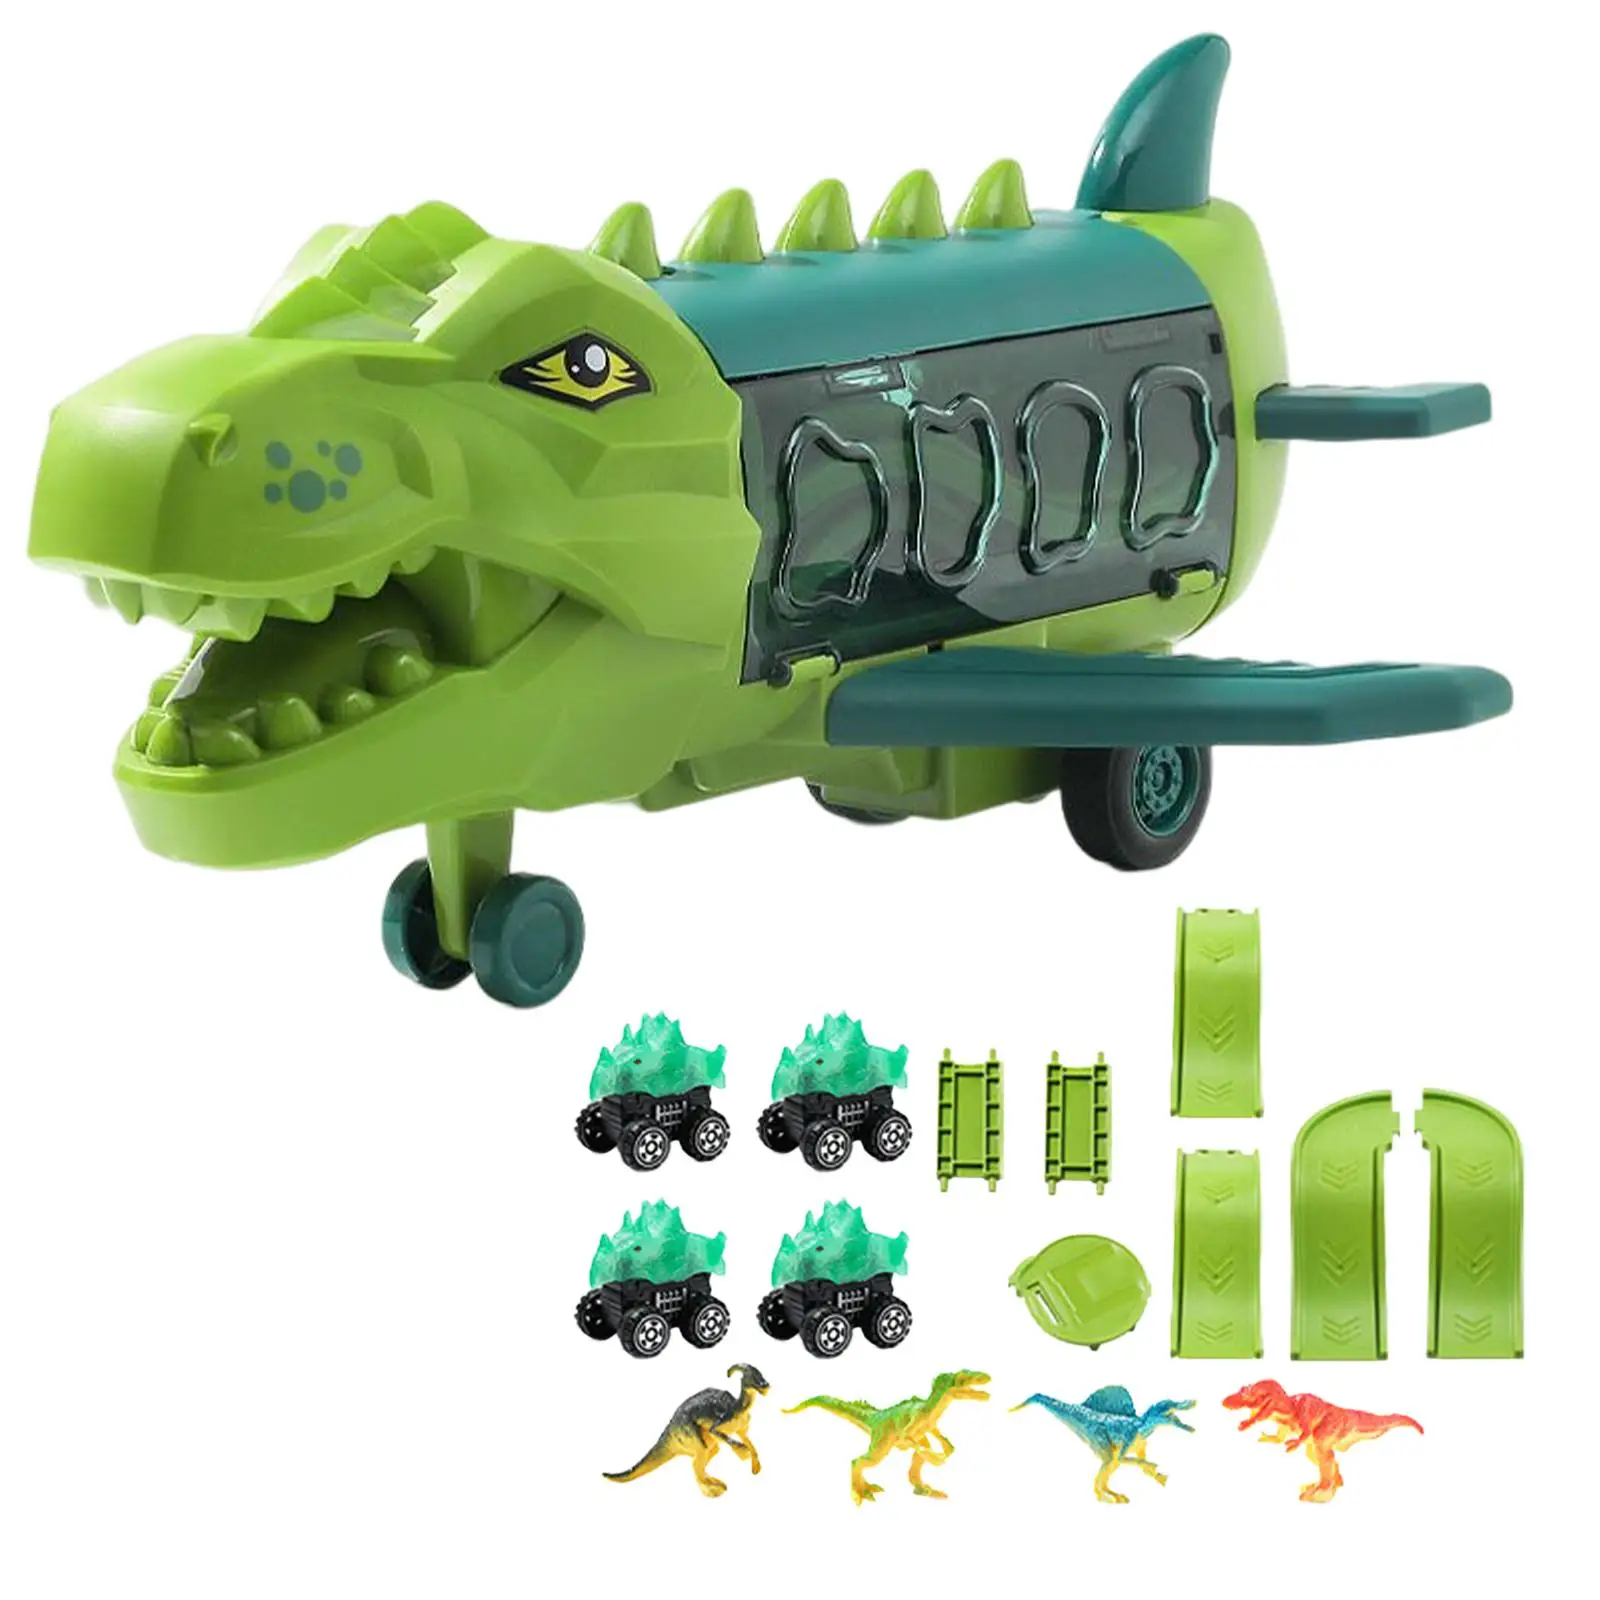 Dinosaur Toys Plane Transport Cars Playset for Pretend Toy Children Boys and